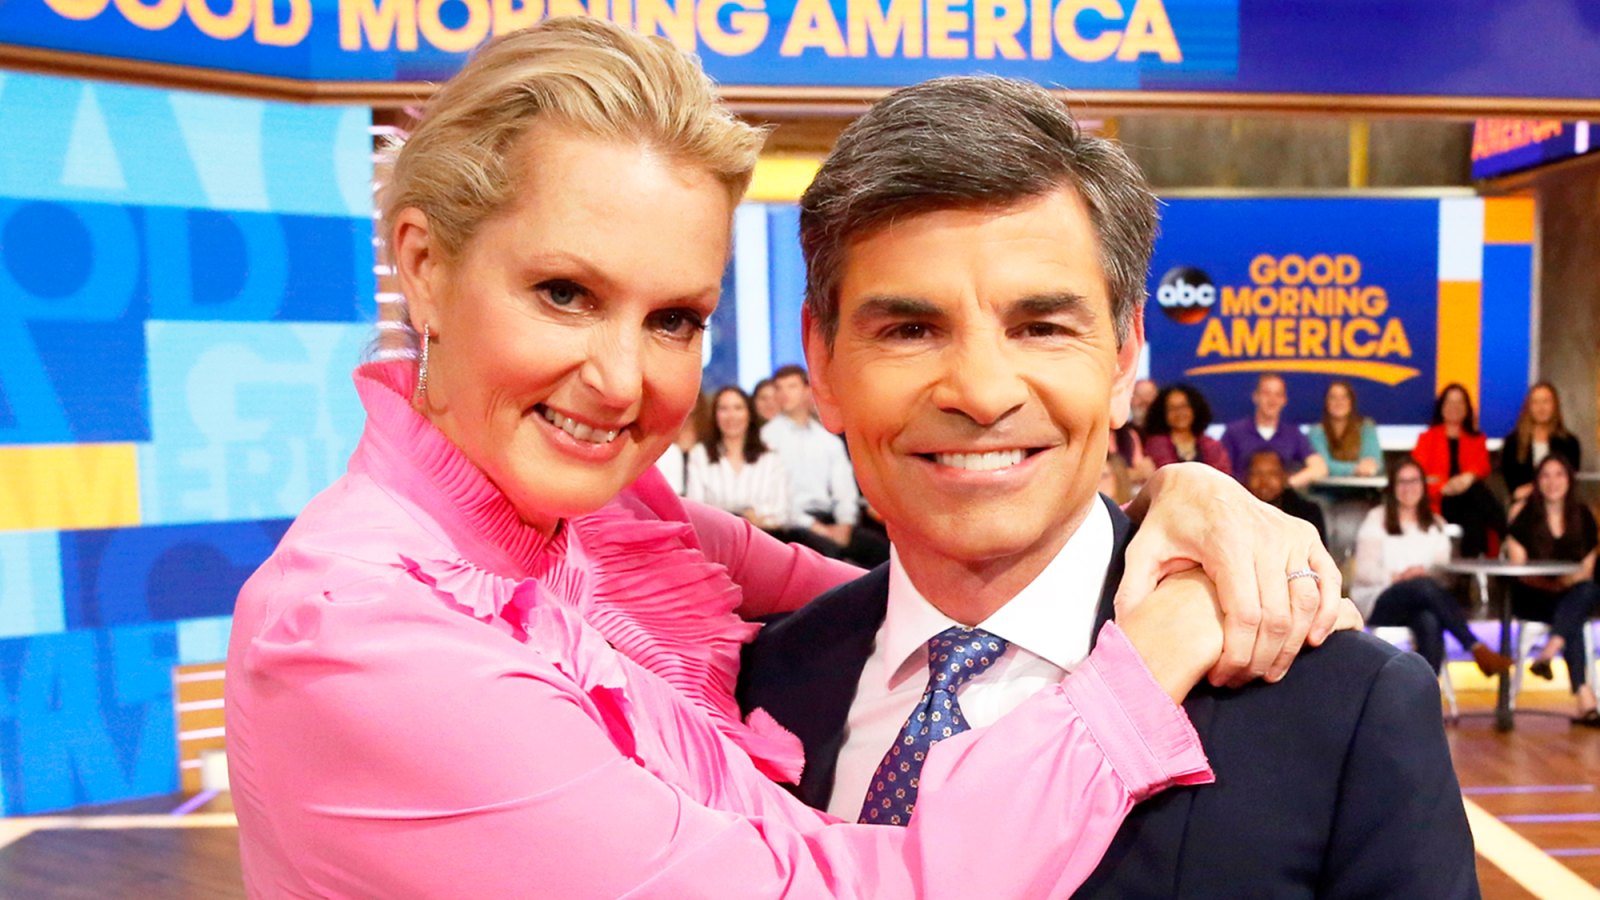 Ali Wentworth and George Stephanopoulos on ‘Good Morning America‘ show